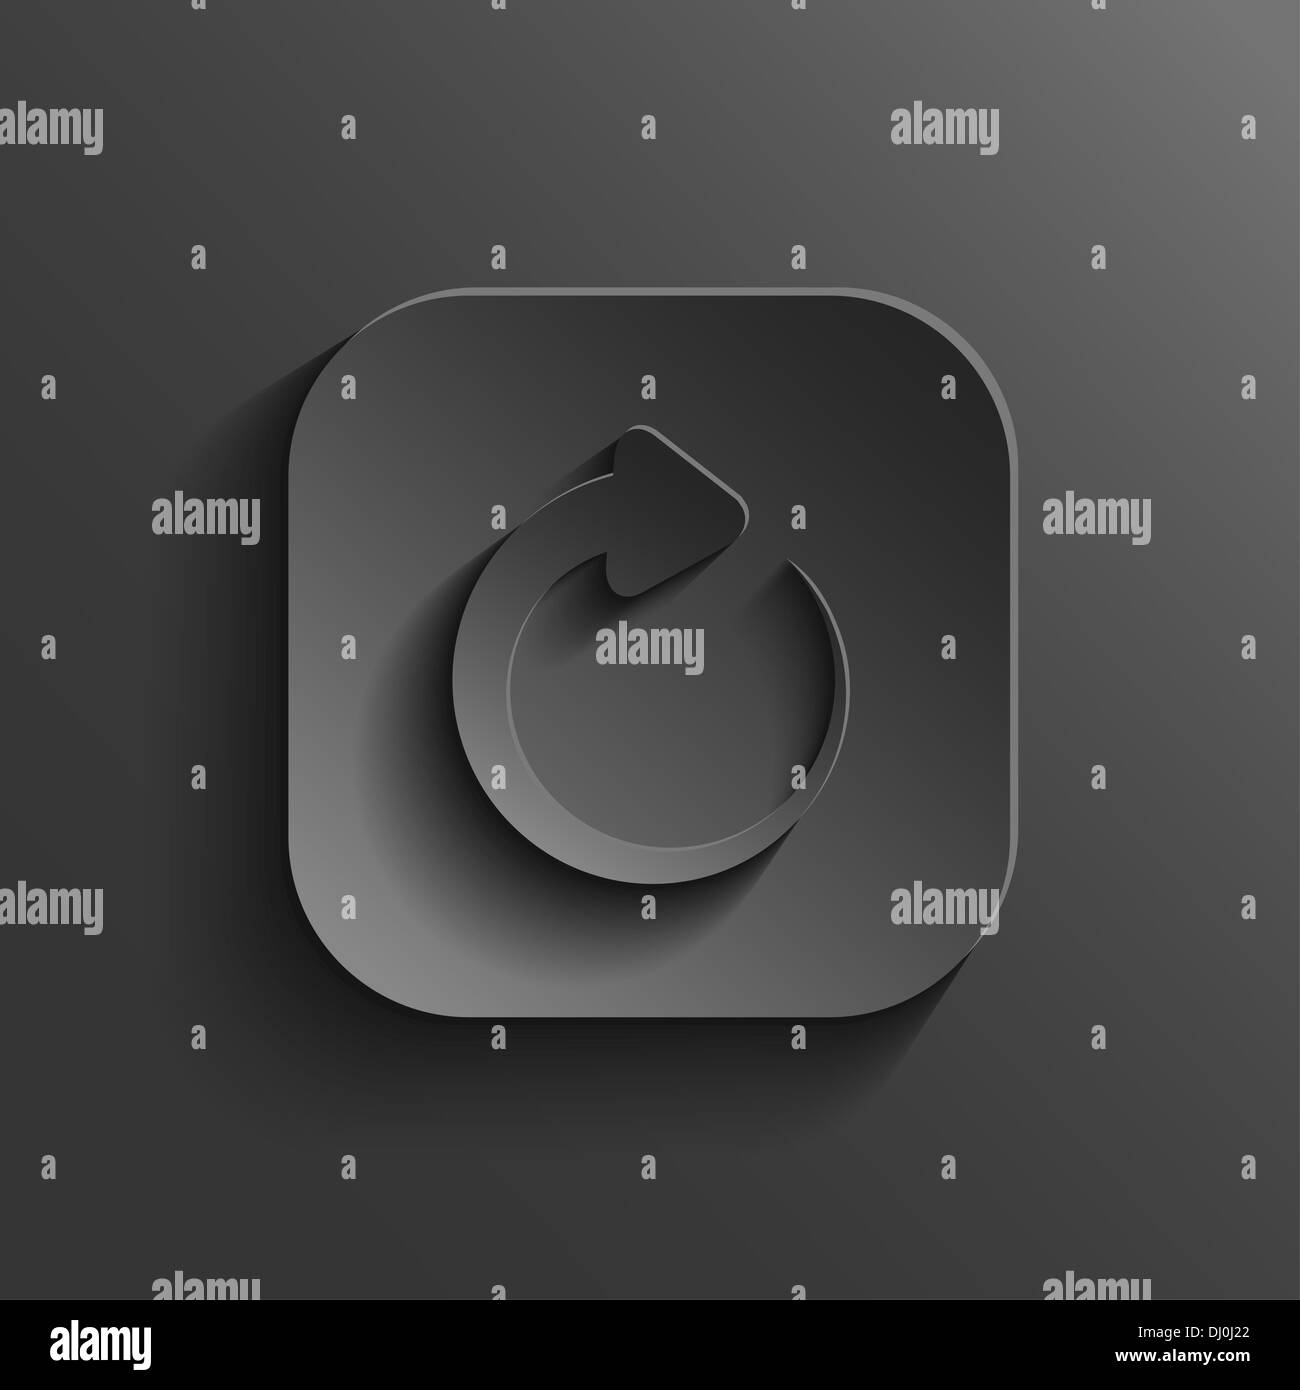 Media player icon -  black app button with shadow Stock Photo